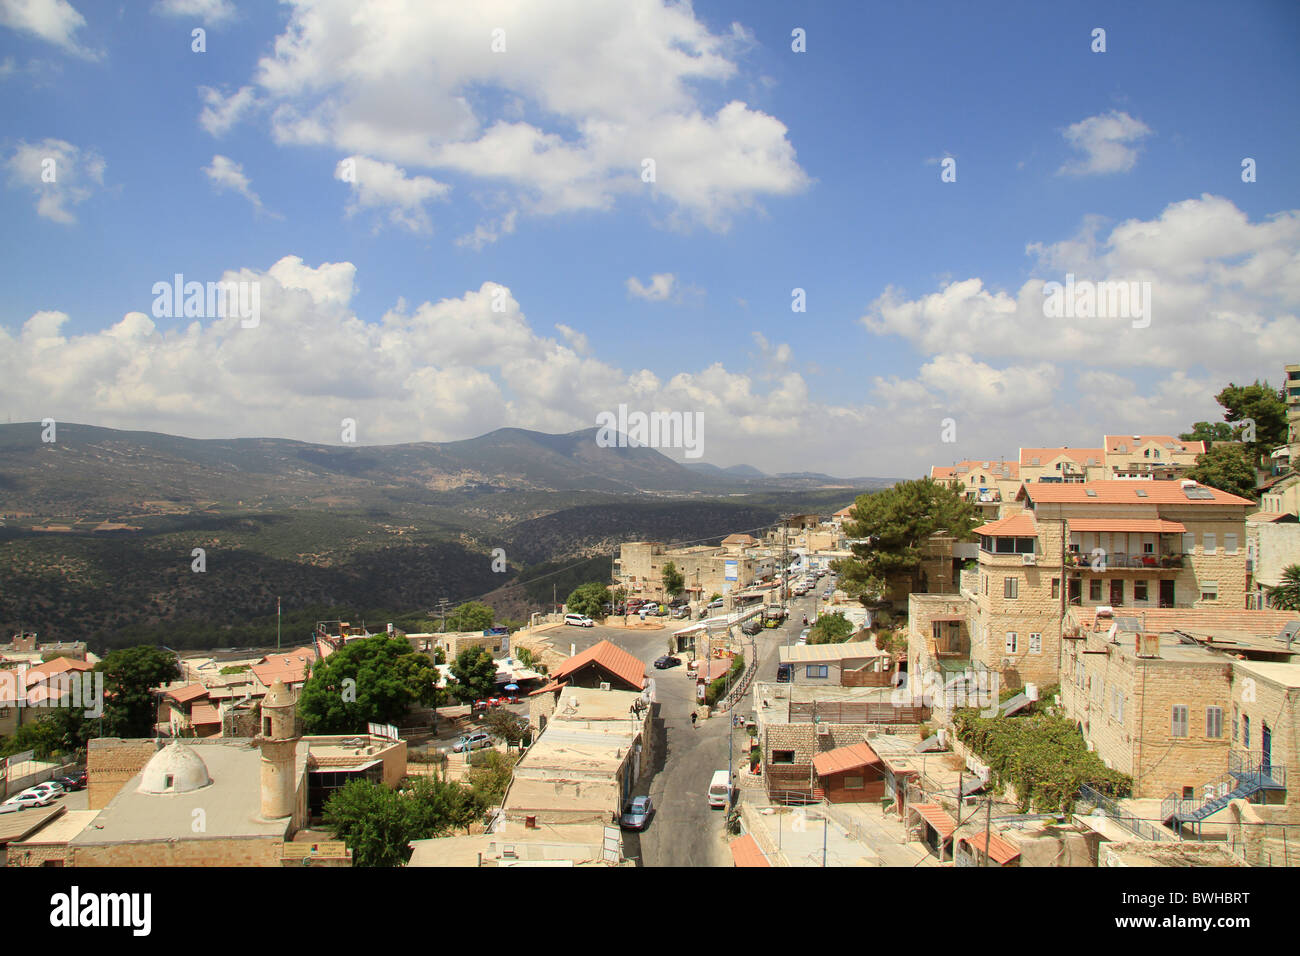 Israel, Upper Galilee, a view of Safed Stock Photo